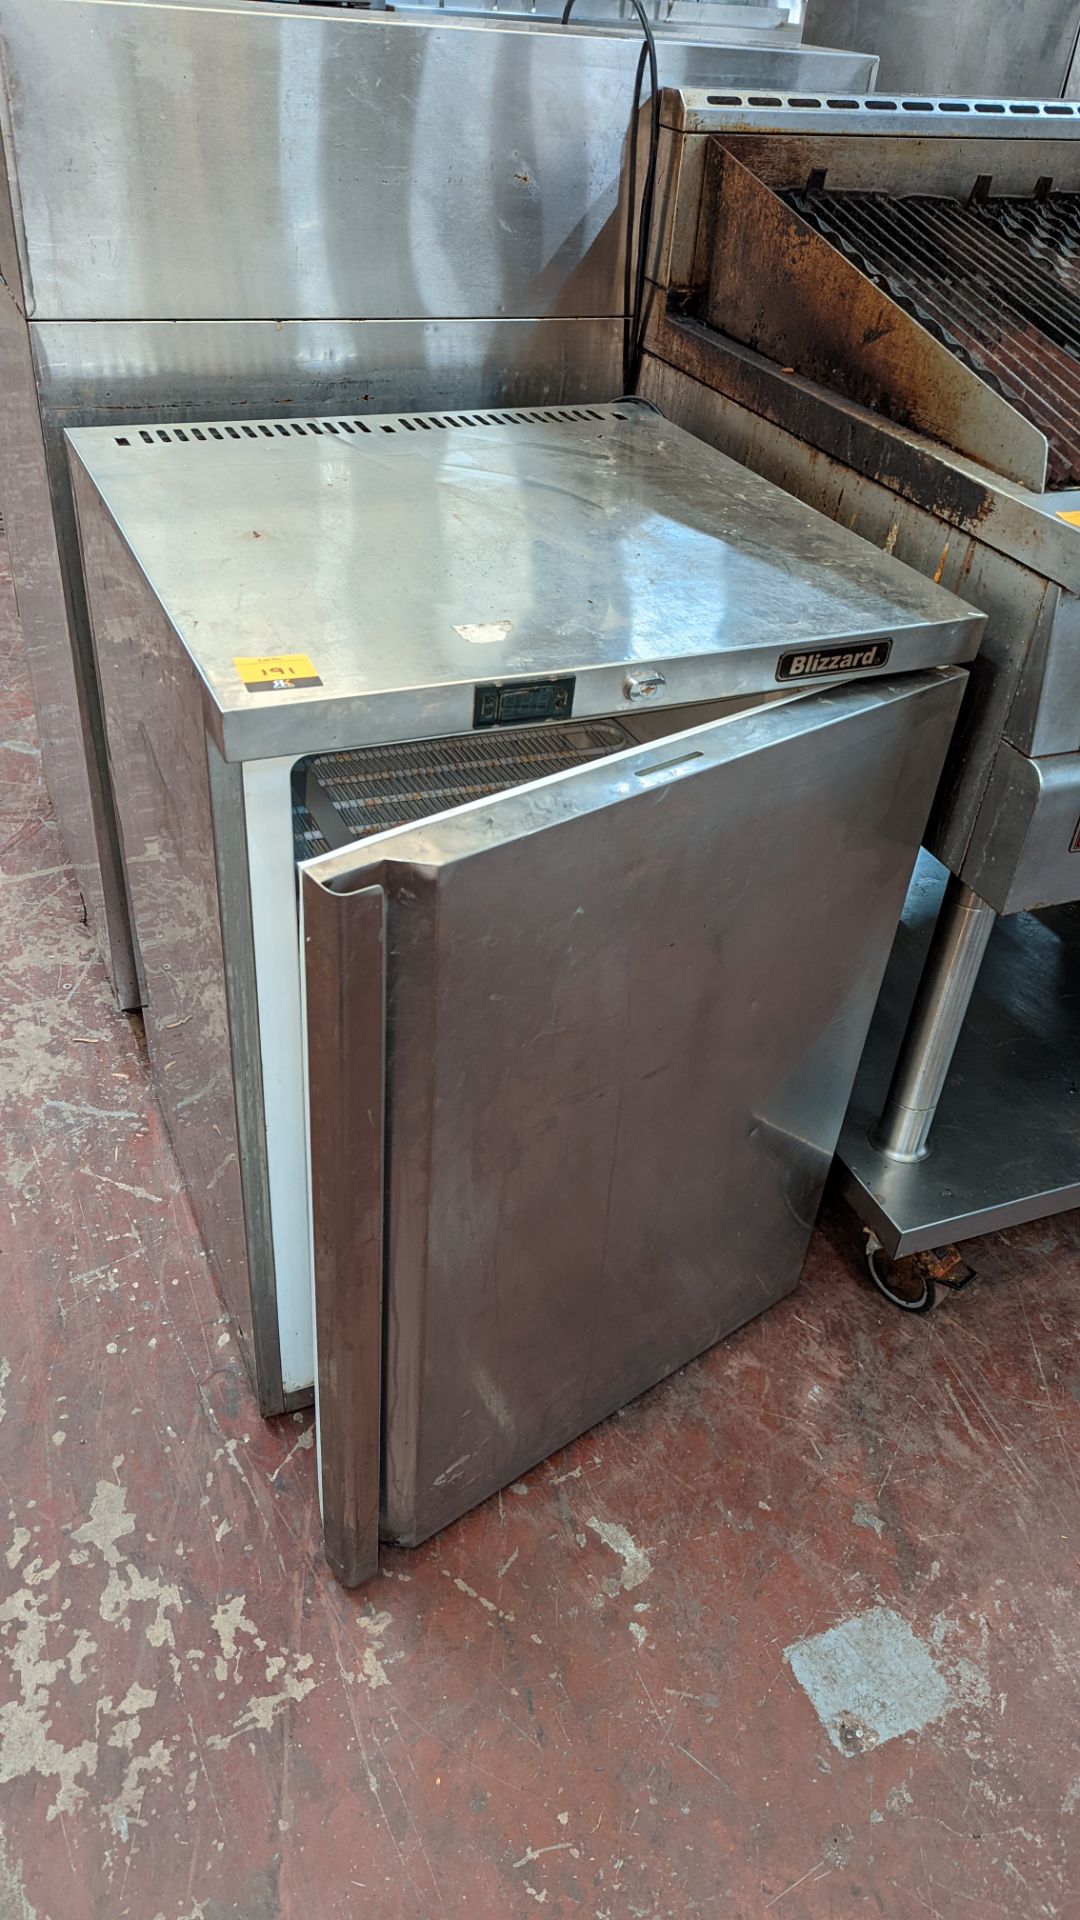 Blizzard stainless steel under counter commercial freezer